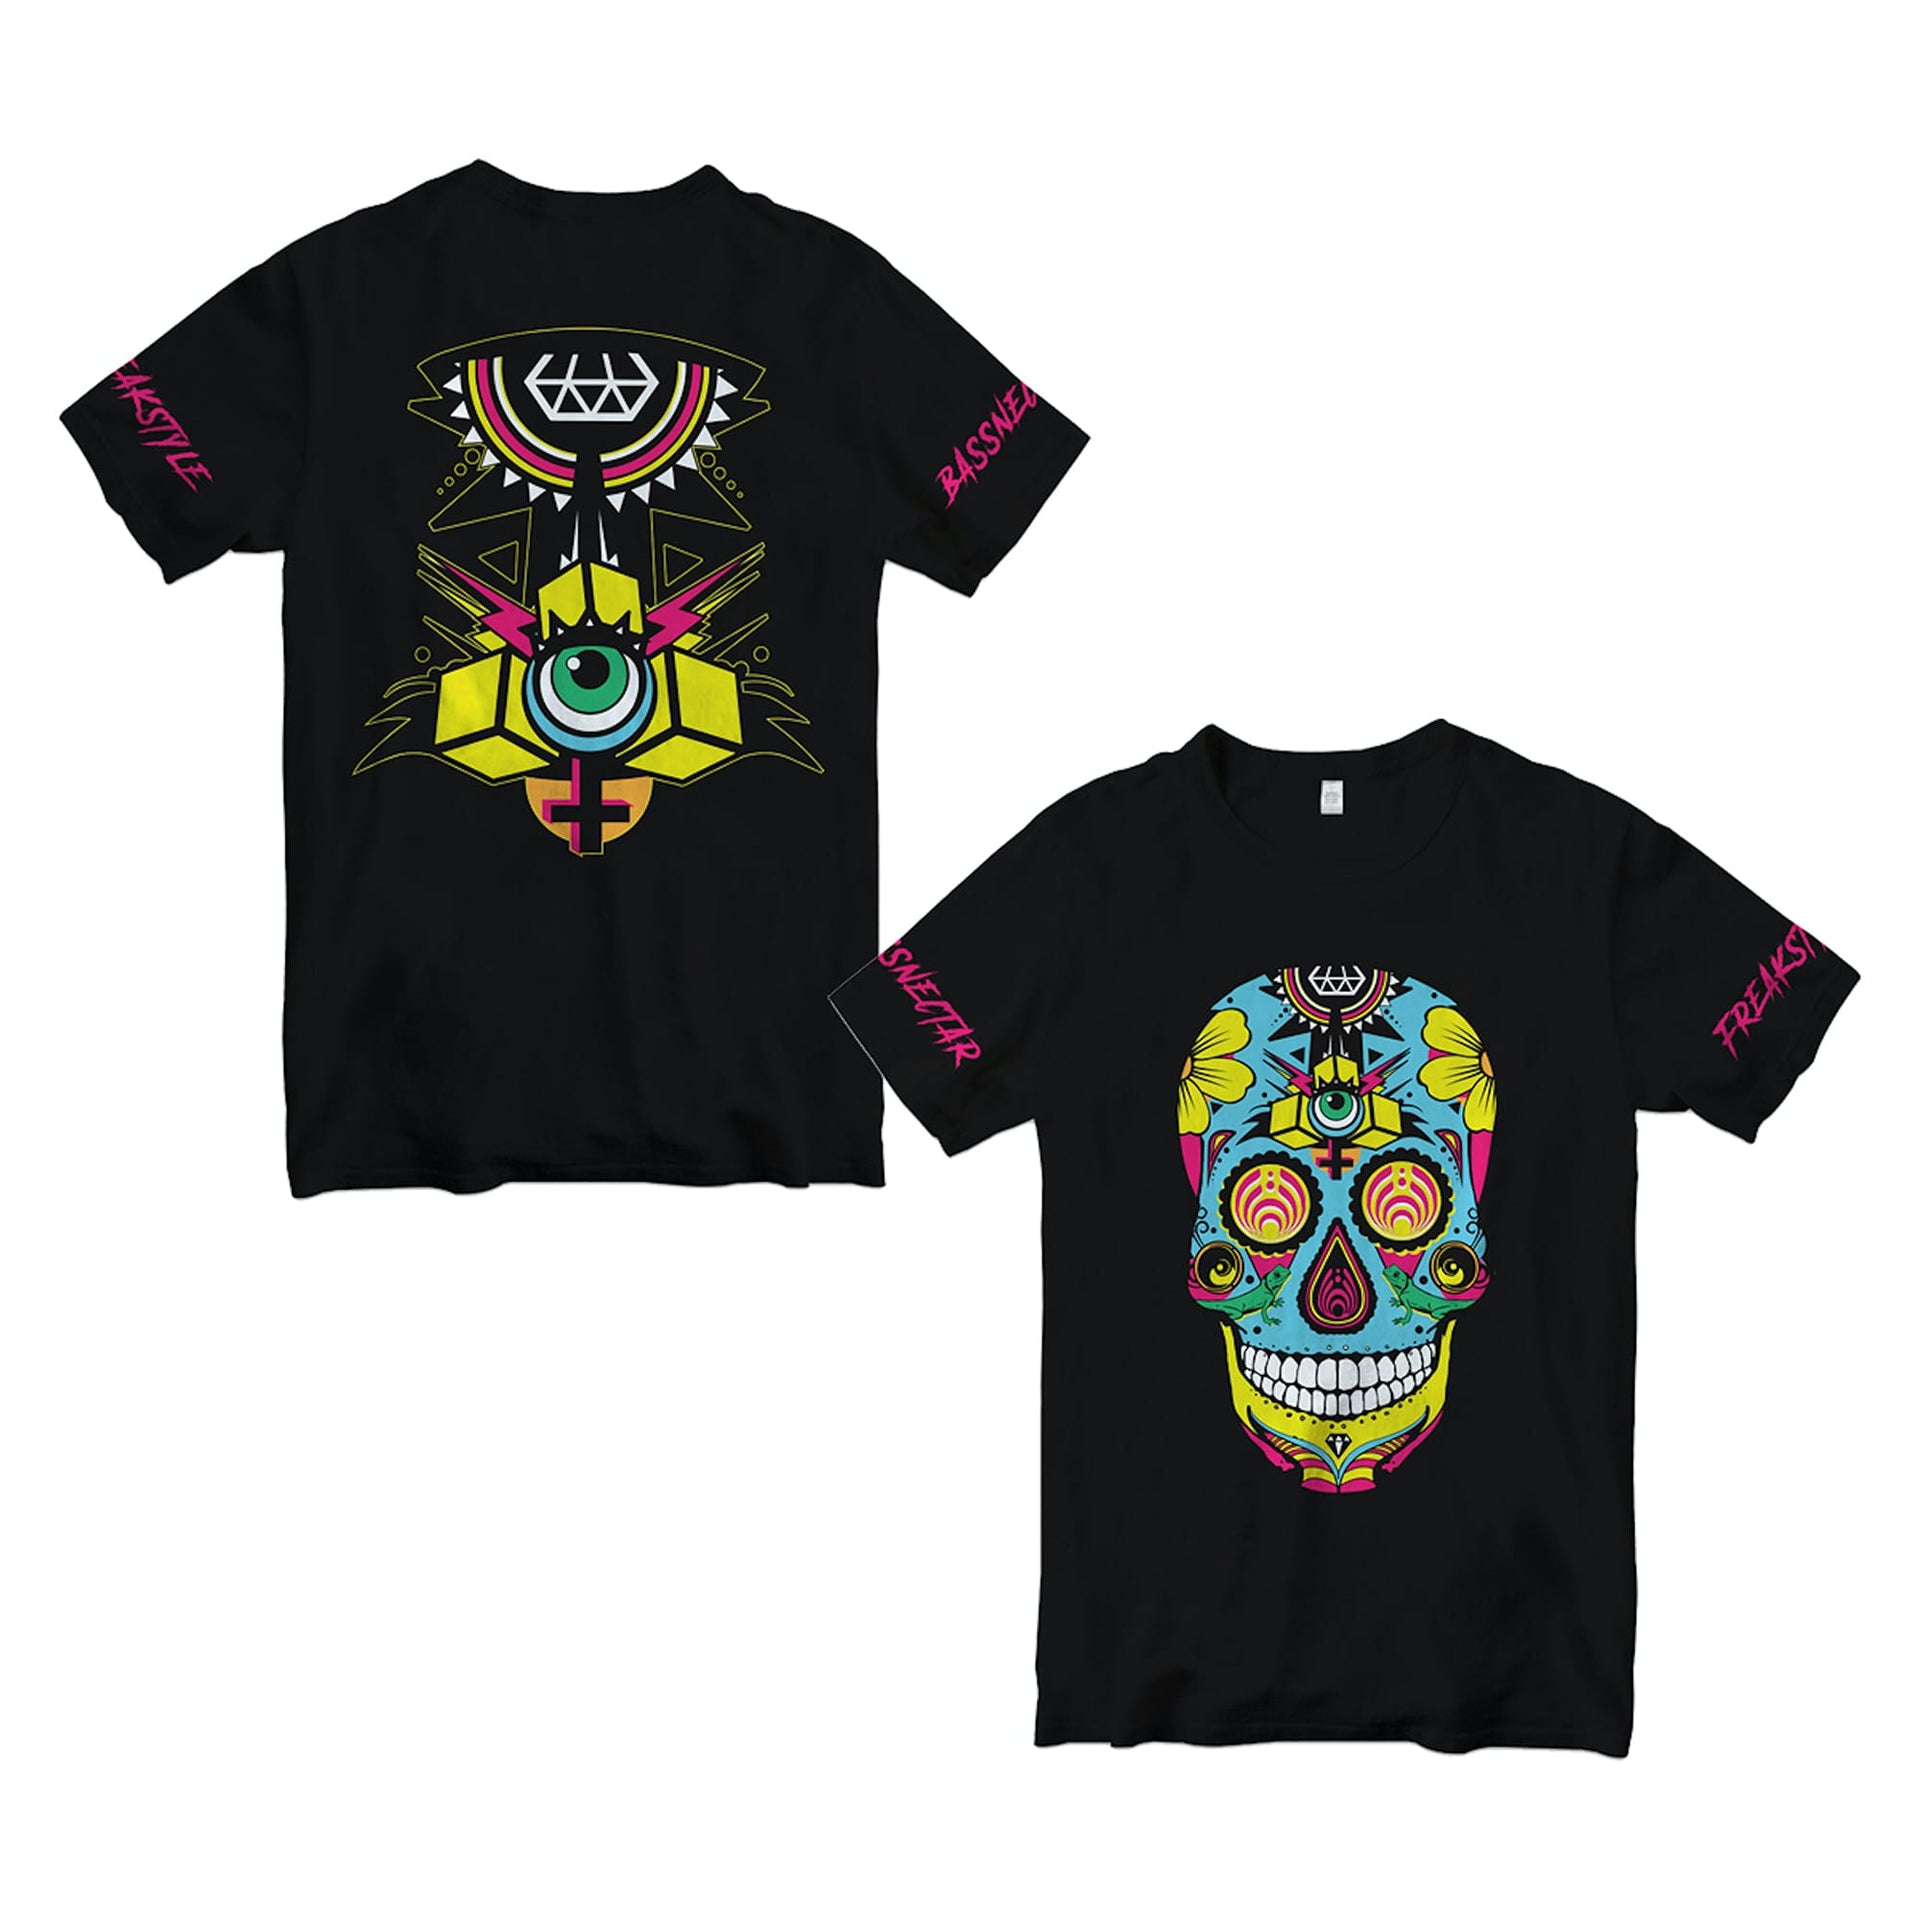 Freakstyle 2019 Event Tee